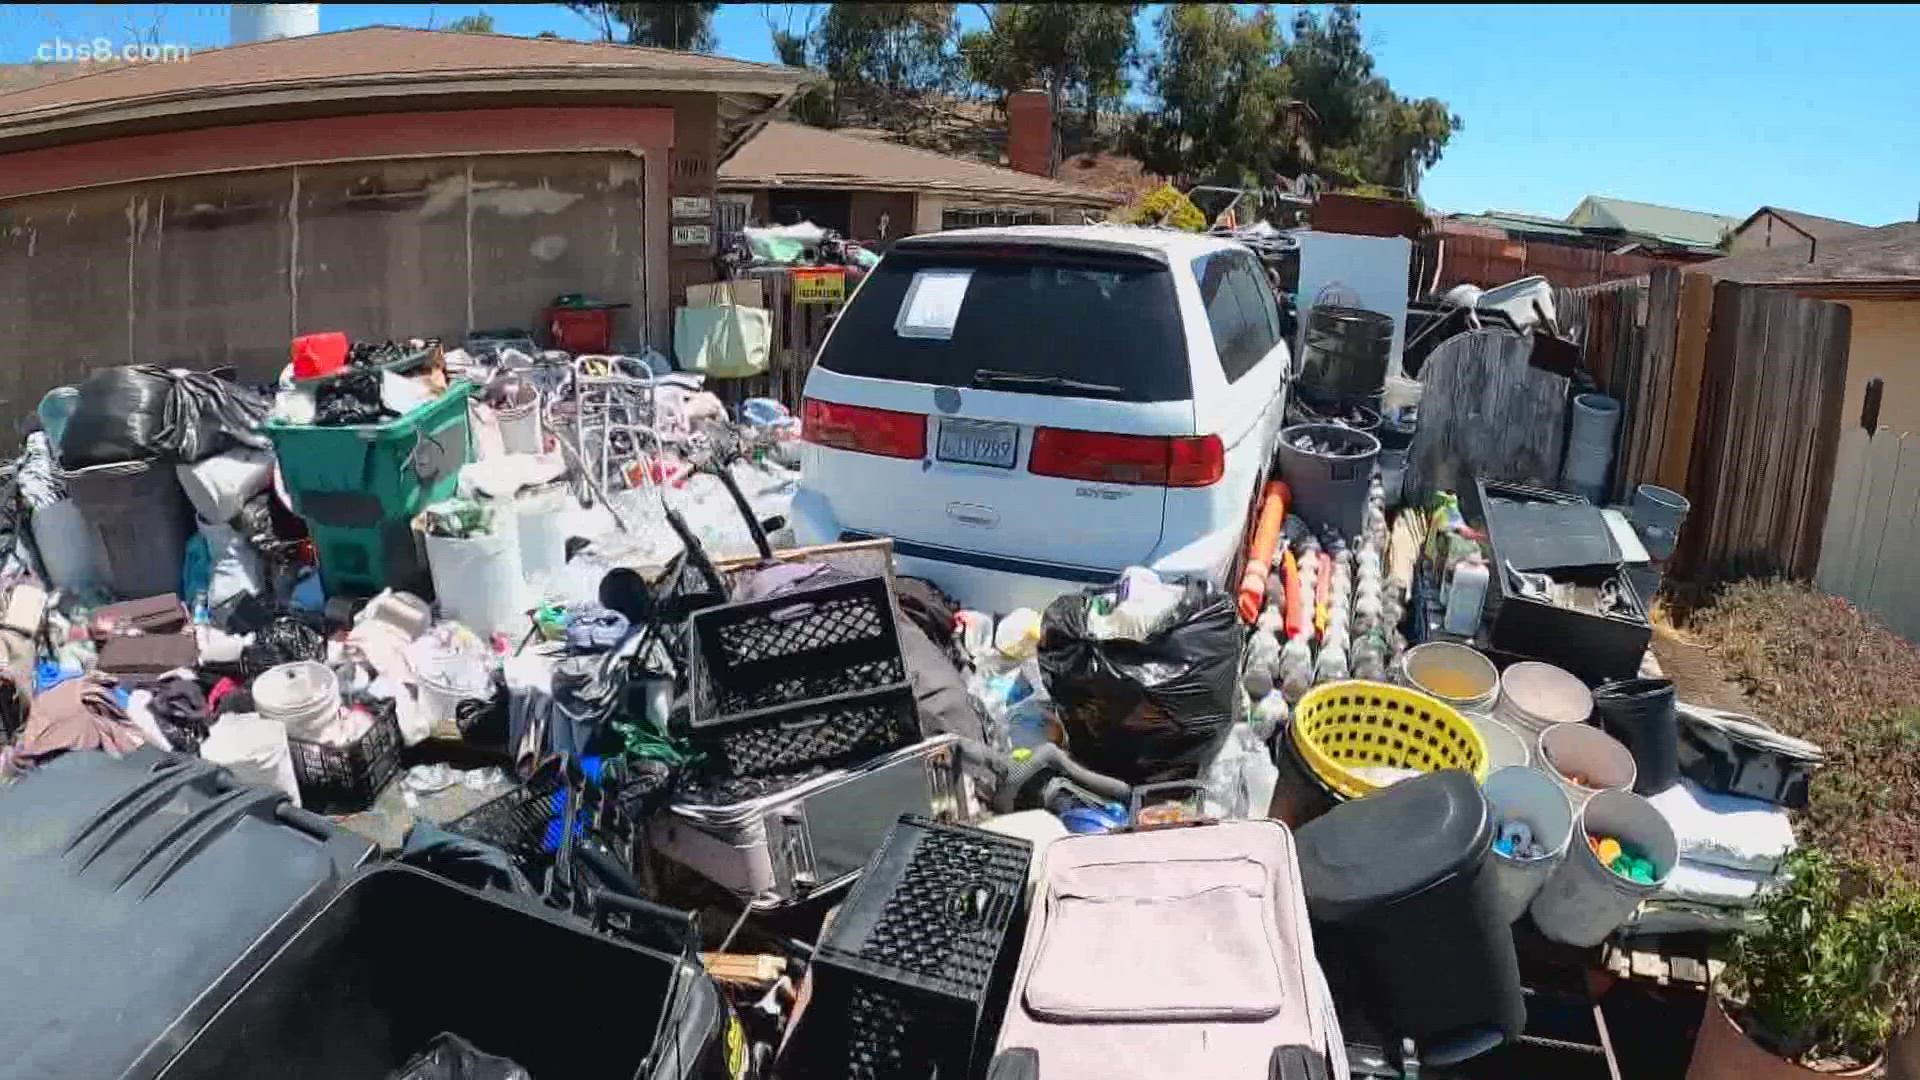 A cleanup effort is underway for a home in a Bay Terraces neighborhood piled high with trash. Neighbors complained of the stench of urine and feces for years.